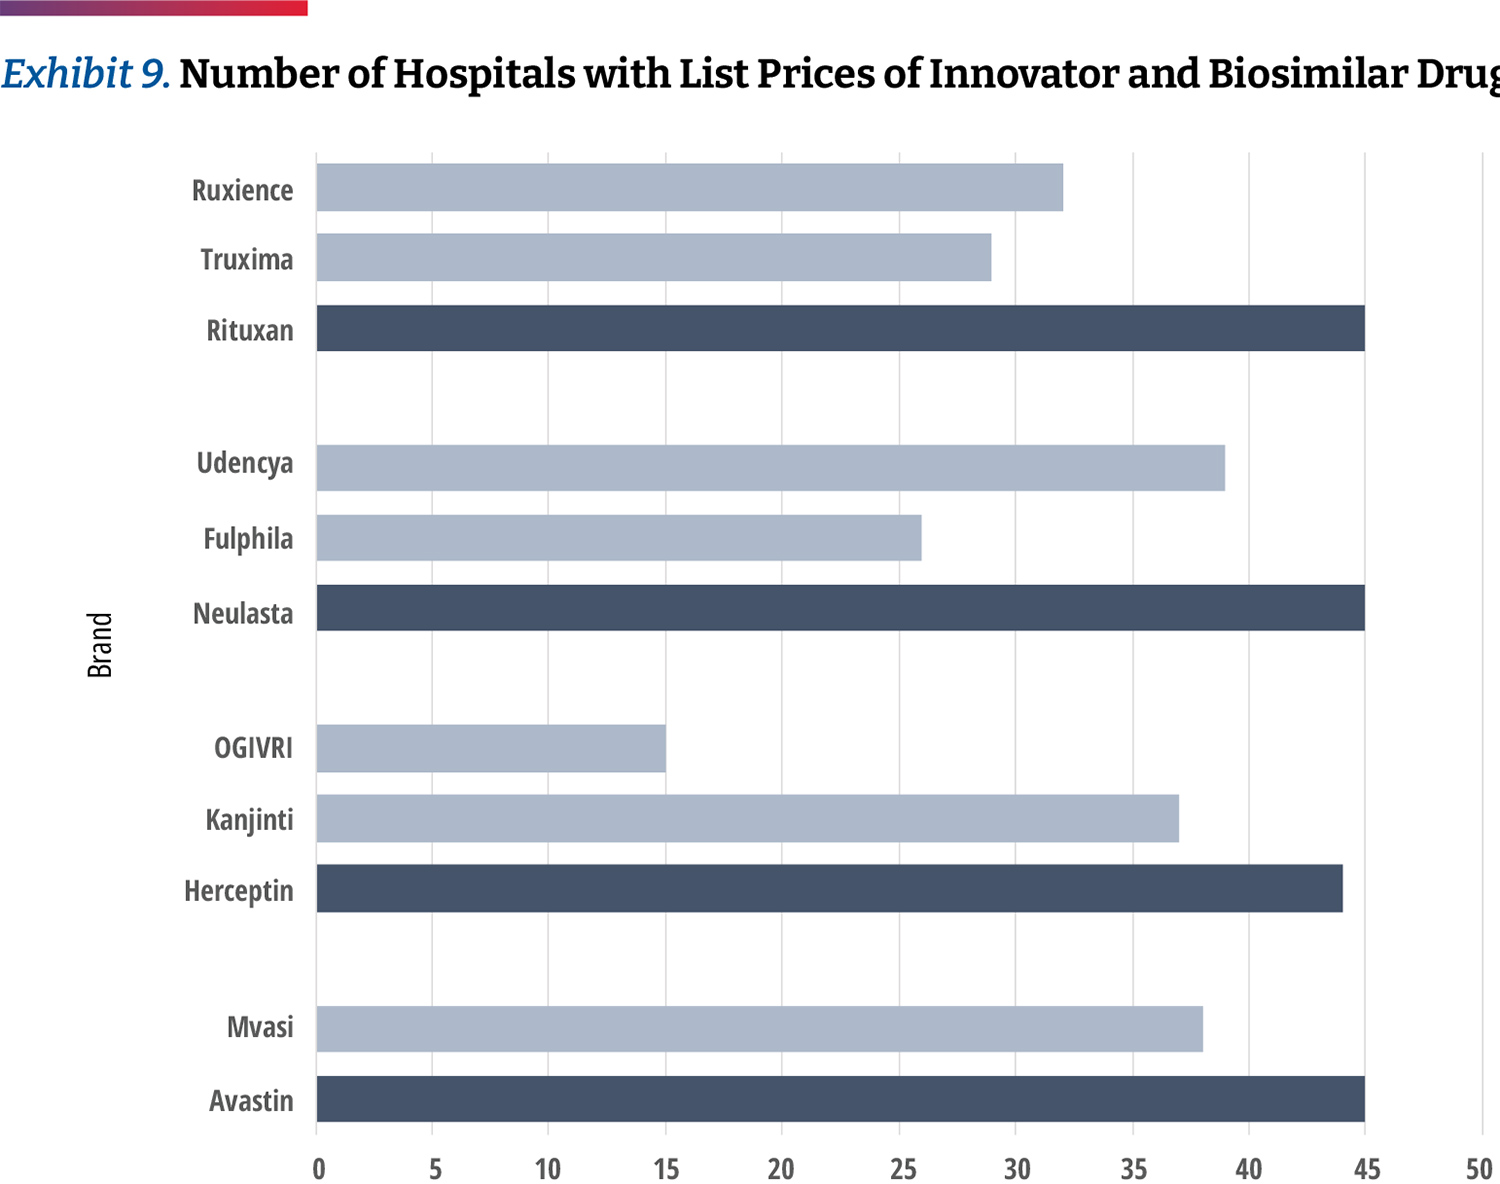 Exhibit 9 Number of Hospitals with List Prices of Innovator and Biosimilar Drugs